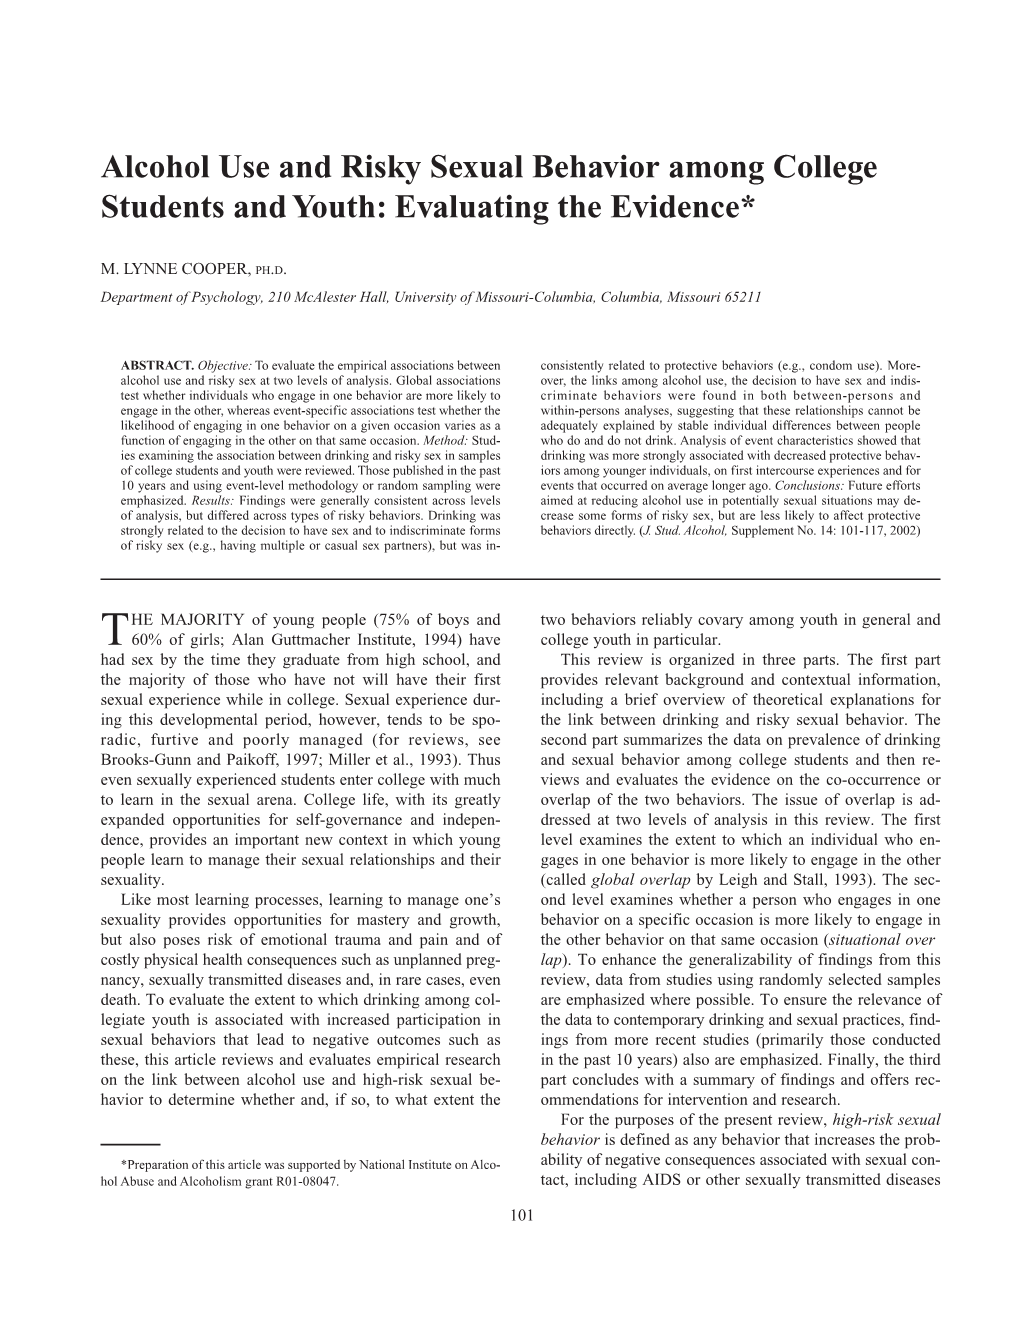 Alcohol Use and Risky Sexual Behavior Among College Students and Youth: Evaluating the Evidence*